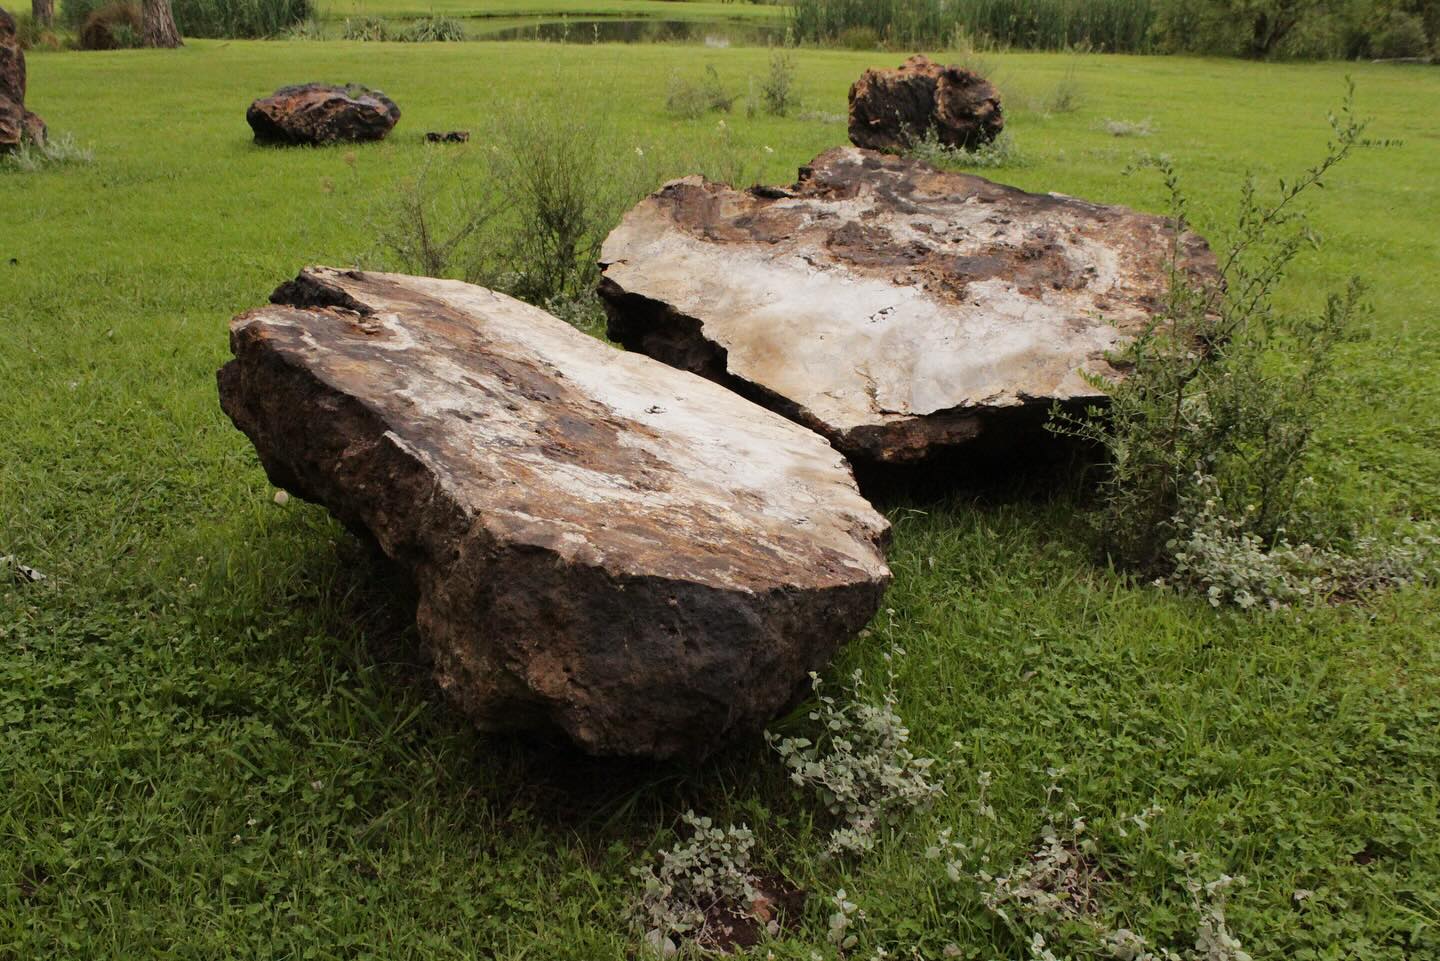 Willem Boshoff's Stone Circle is one of the permanent installations at Nirox Sculpture Park. Photo: Nirox Foundation.